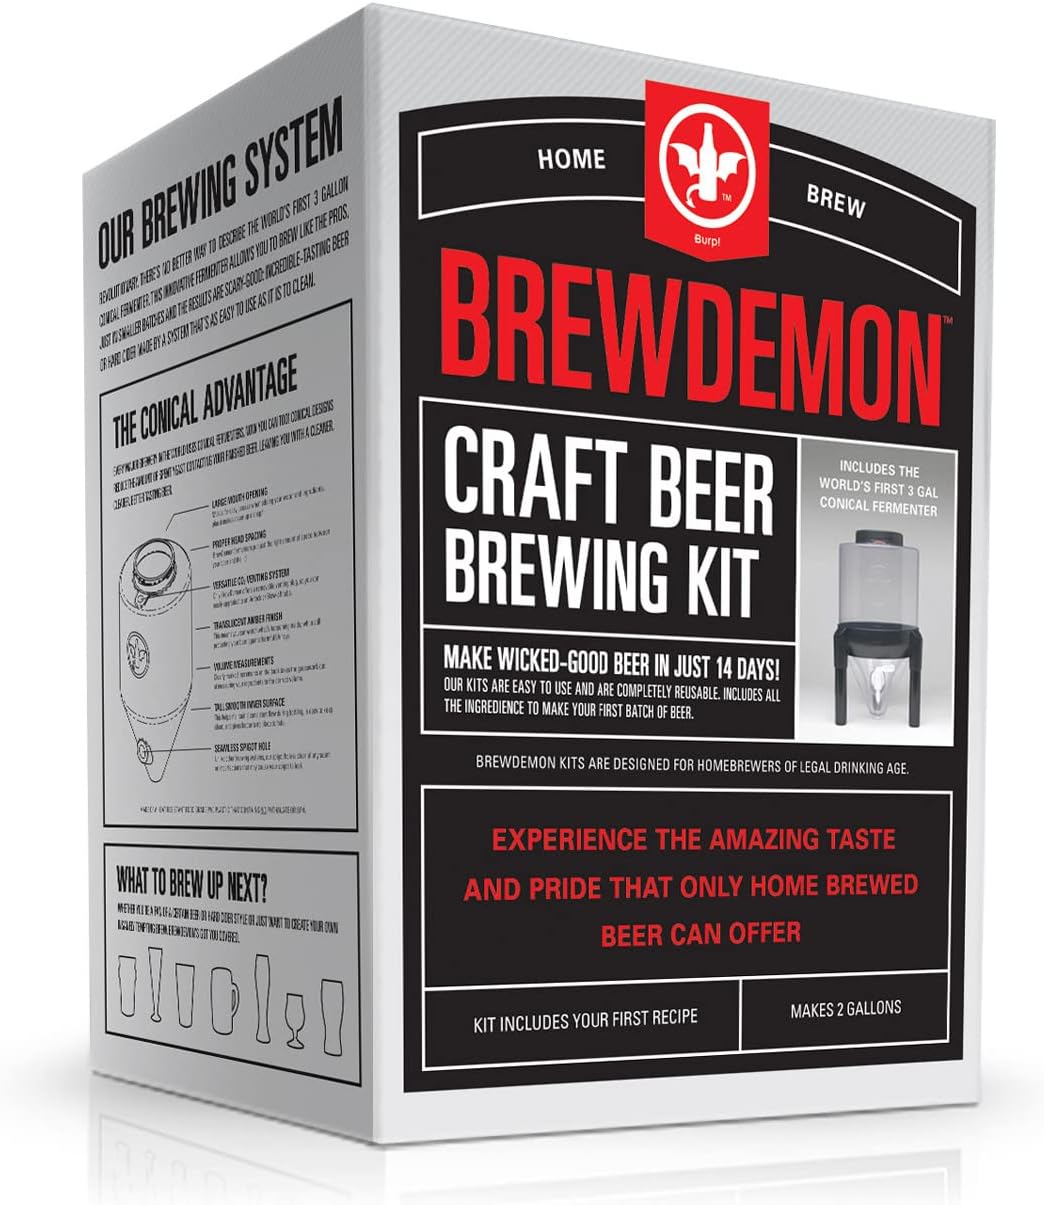 BrewDemon Craft Beer Brewing Kit Pro with Bottles Review